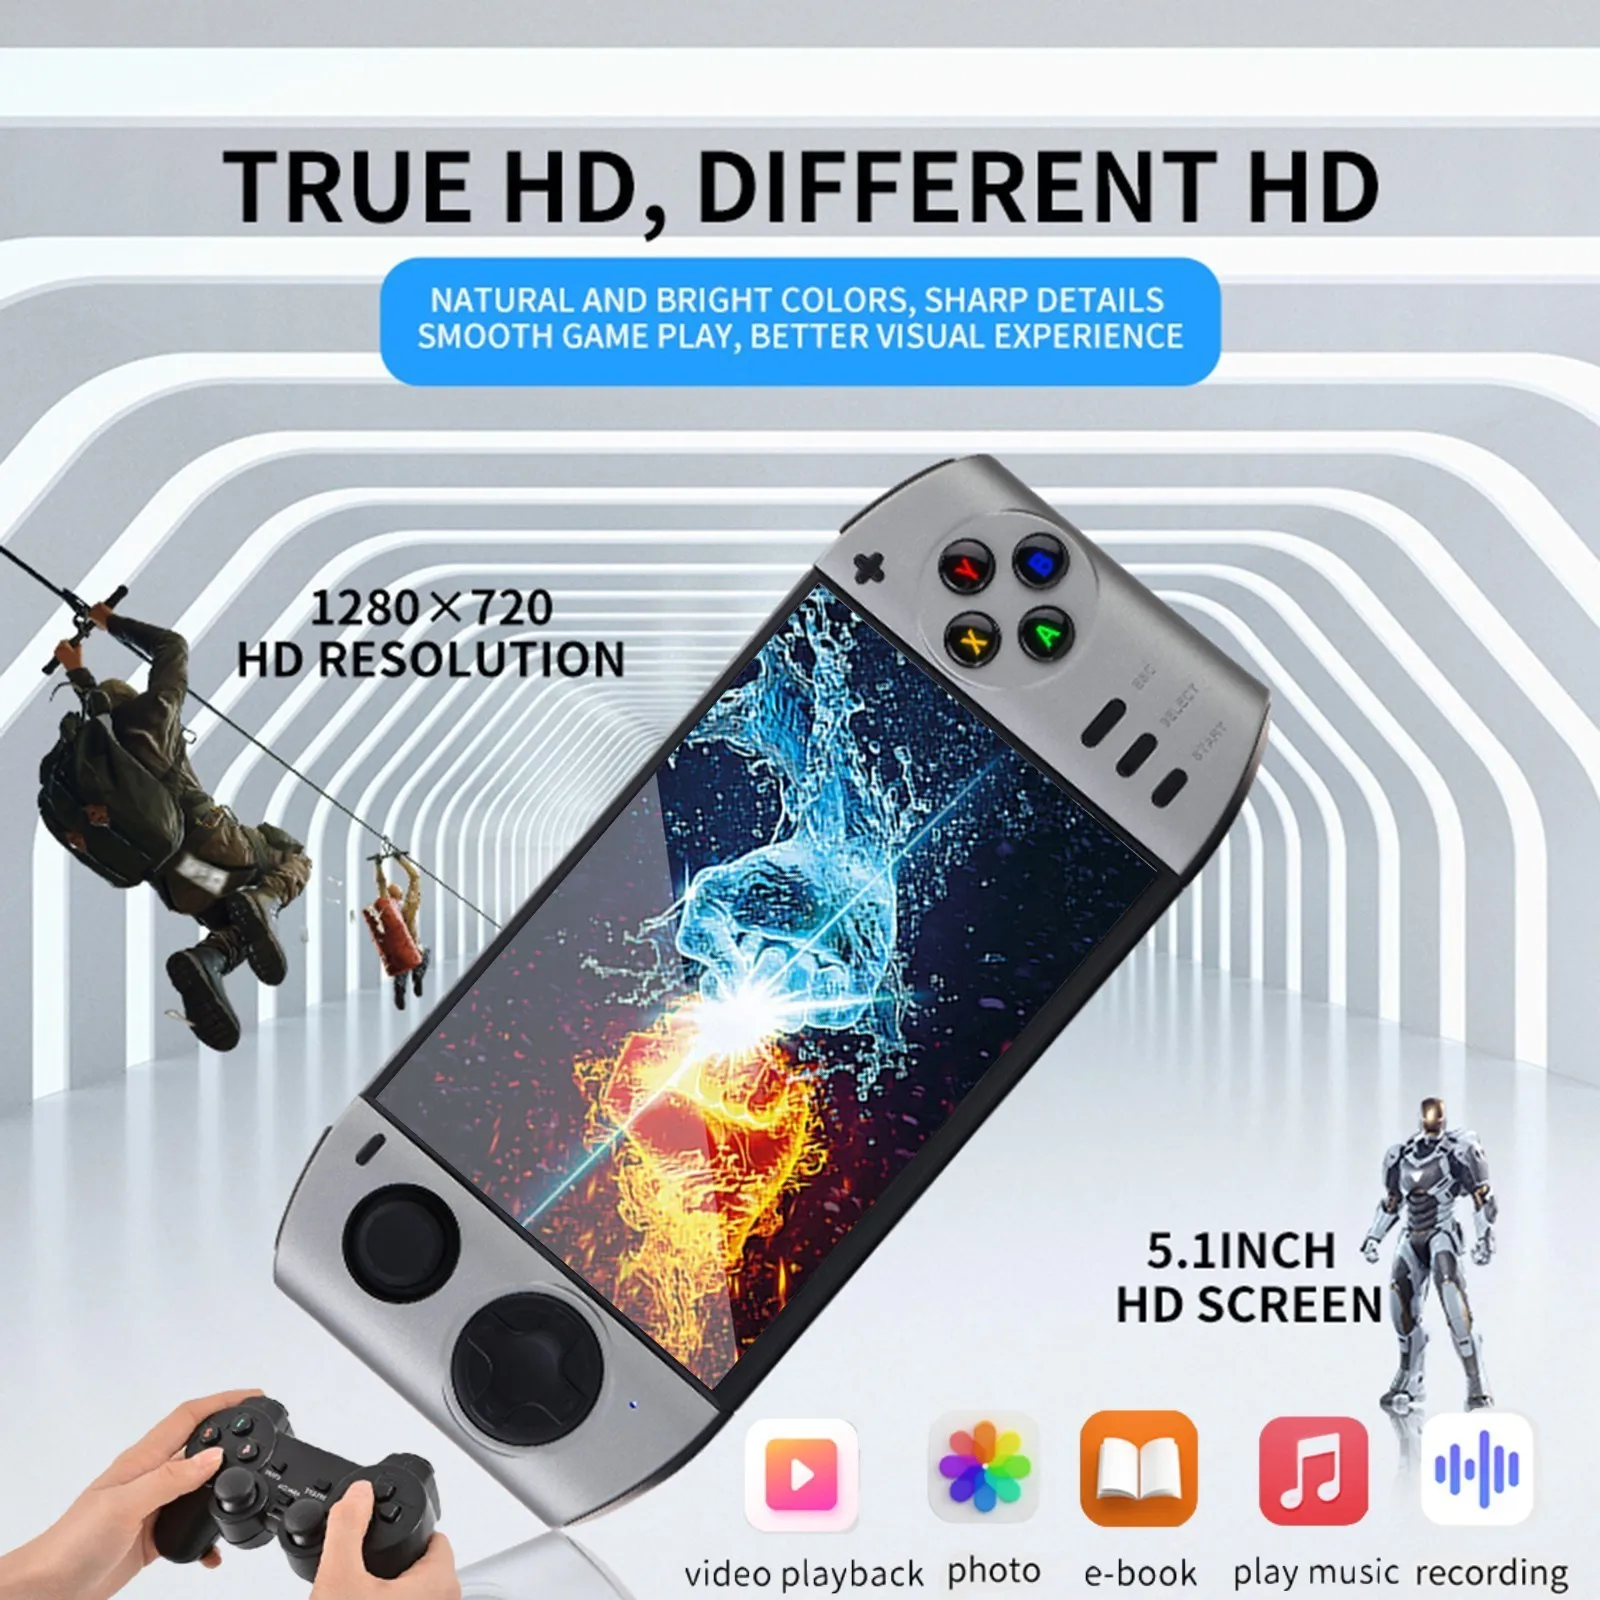 

NEW XY-09 5.1 inch 16 Million Colors 16/9 HD Screen Handheld Game Console Support Wireless Controller Video Gaming Player Toys